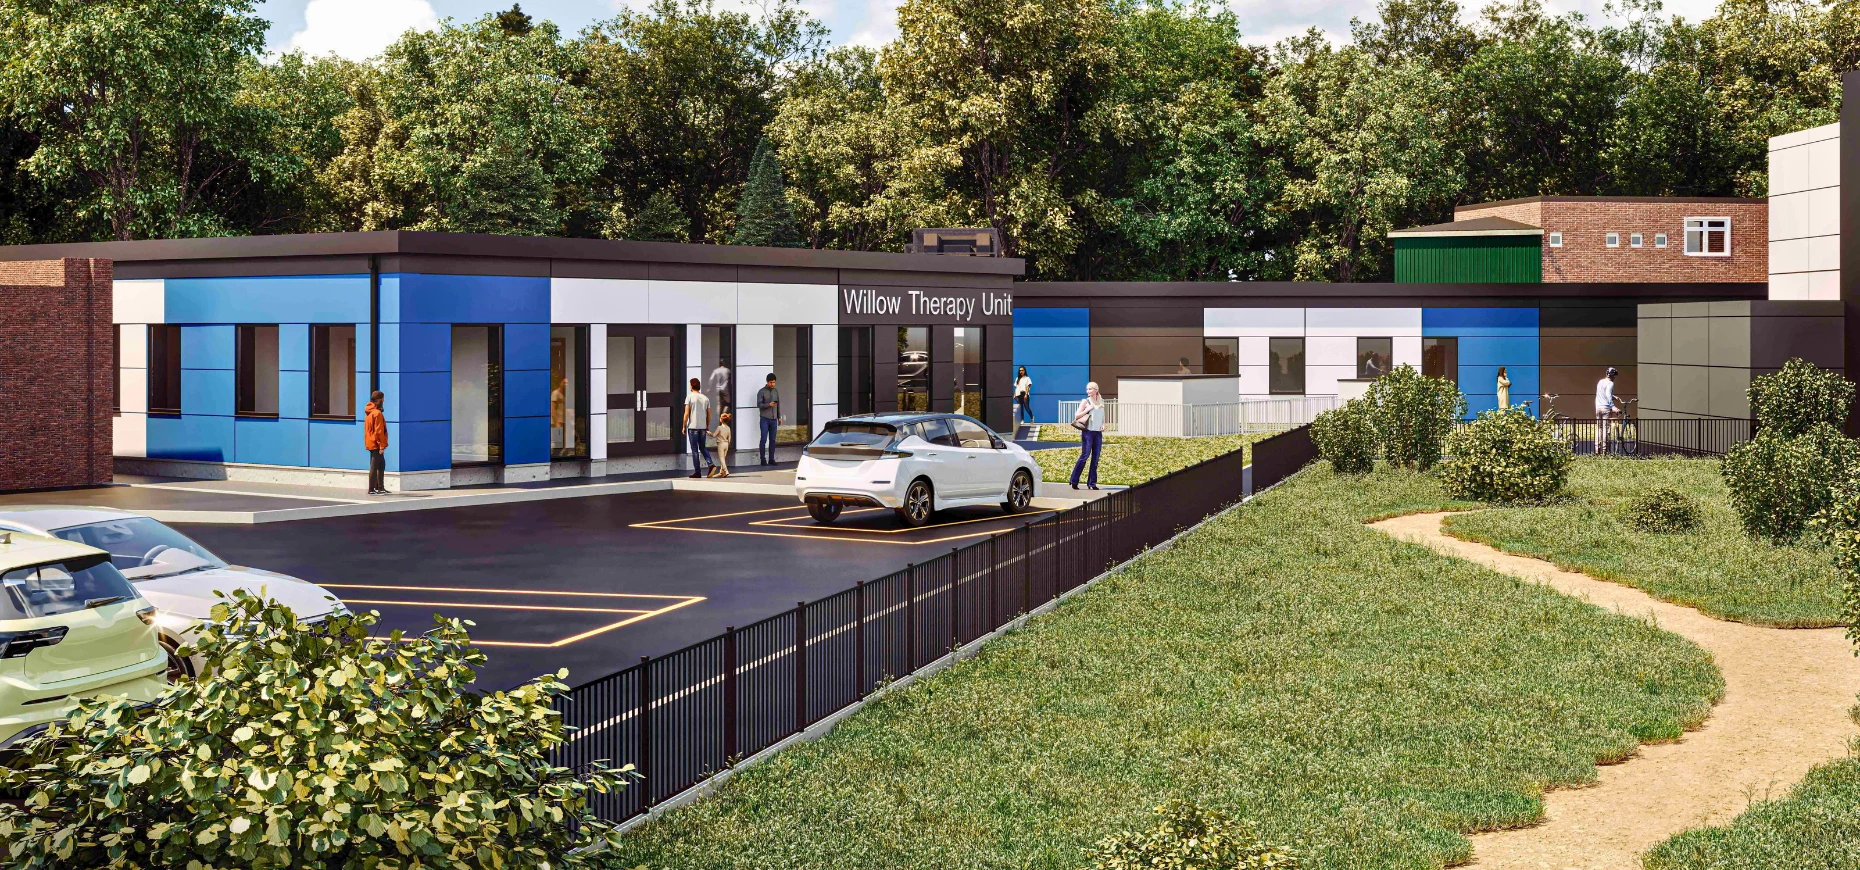 Artist's impression of the 48-bed modular unit.